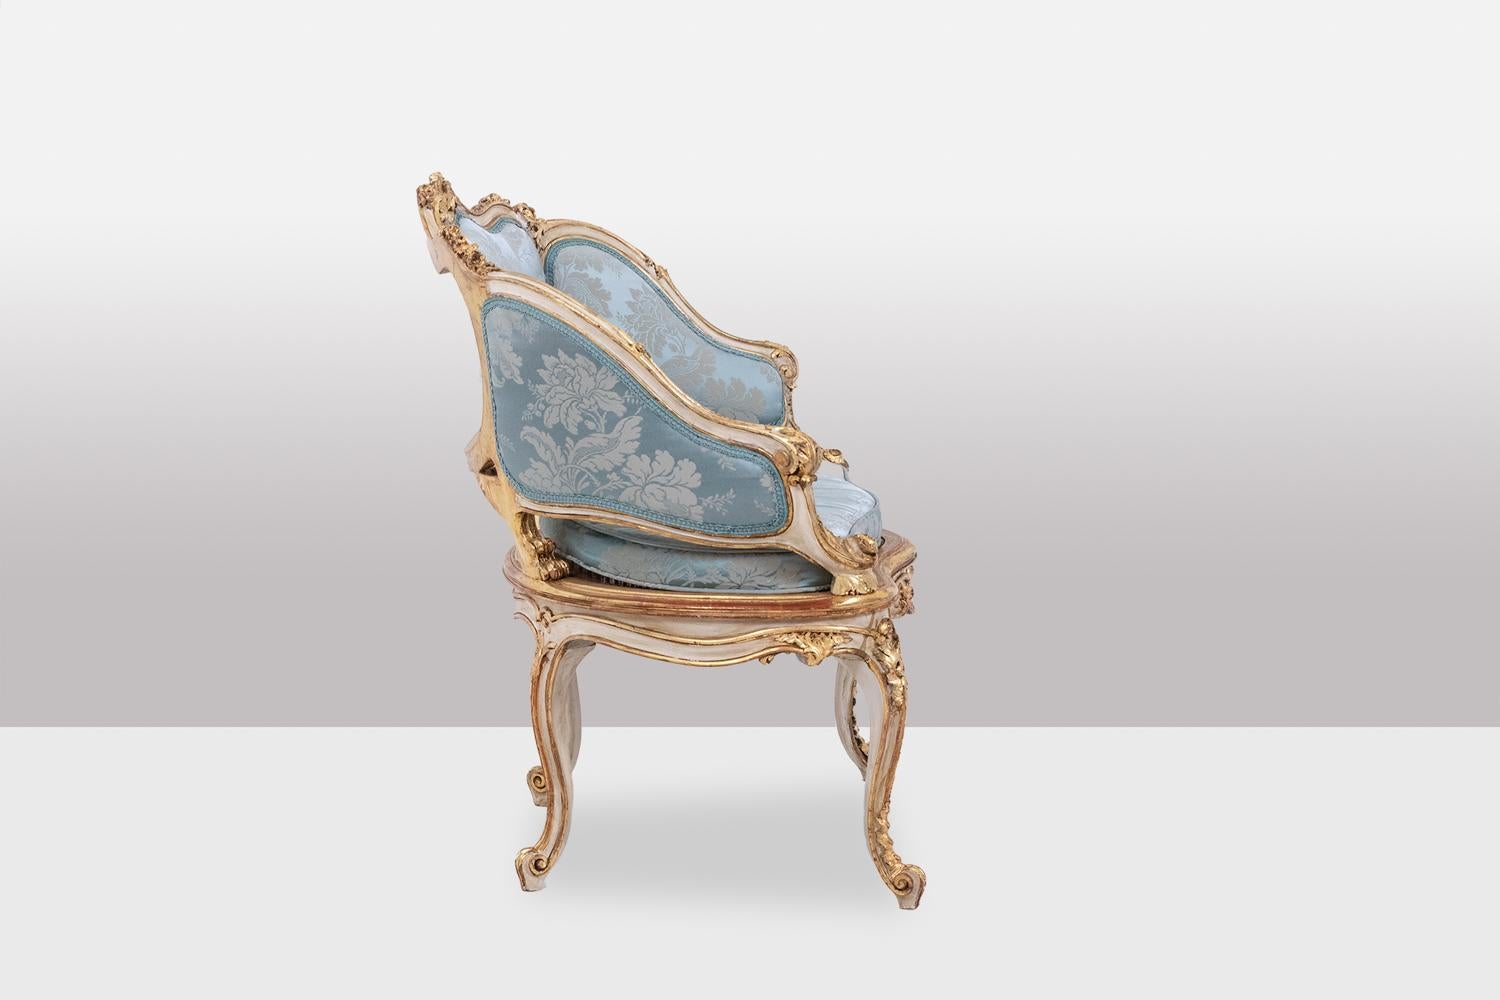 Louis XV Marquise in gilded and carved wood in the LXV style. Circa 1880.